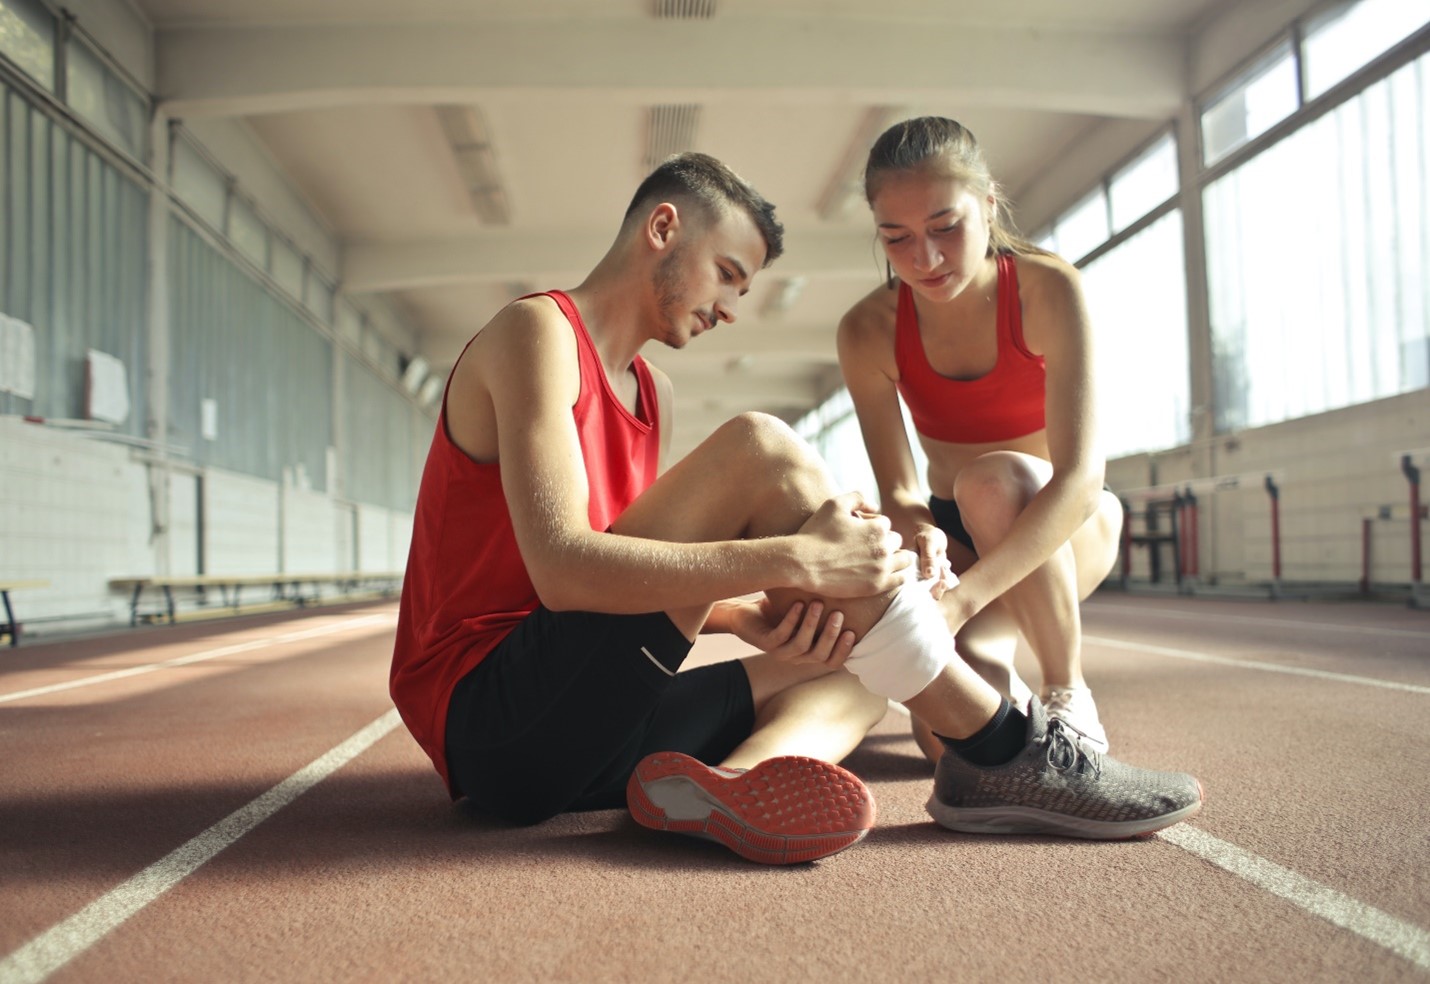 5 Tips To Recover From Injury  Injury Recovery Advice For ATHLETES 